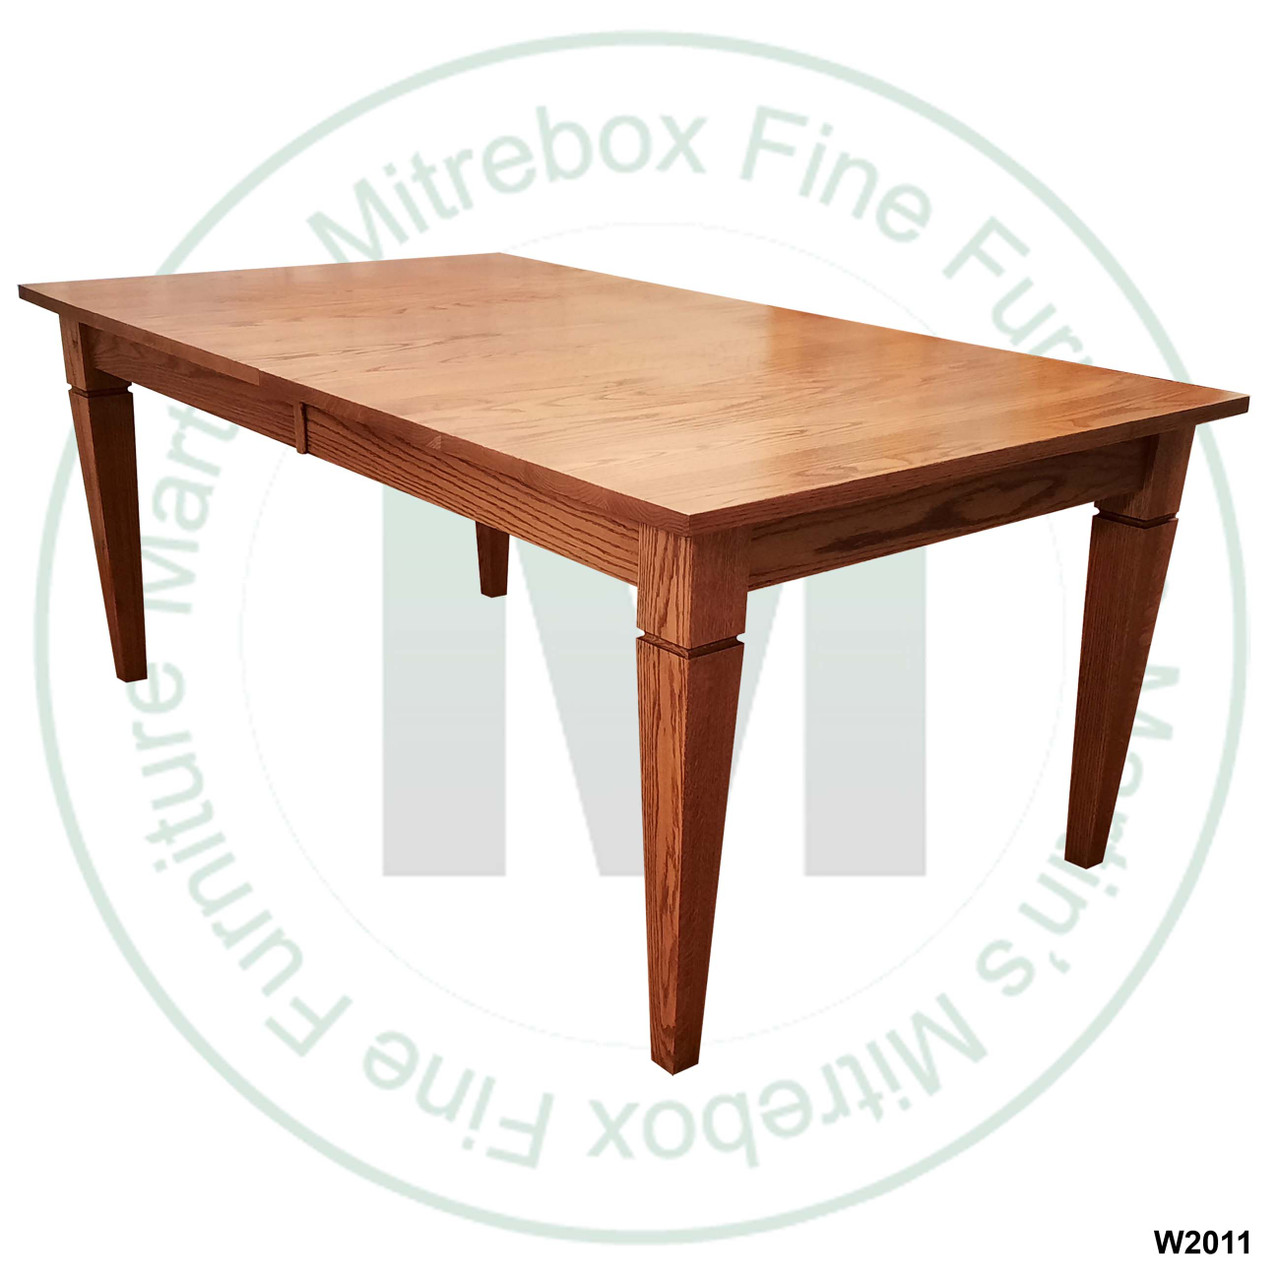 Oak Reesor Solid Top Harvest Table 42''D x 72''W x 30''H Table Has 1'' Thick Top